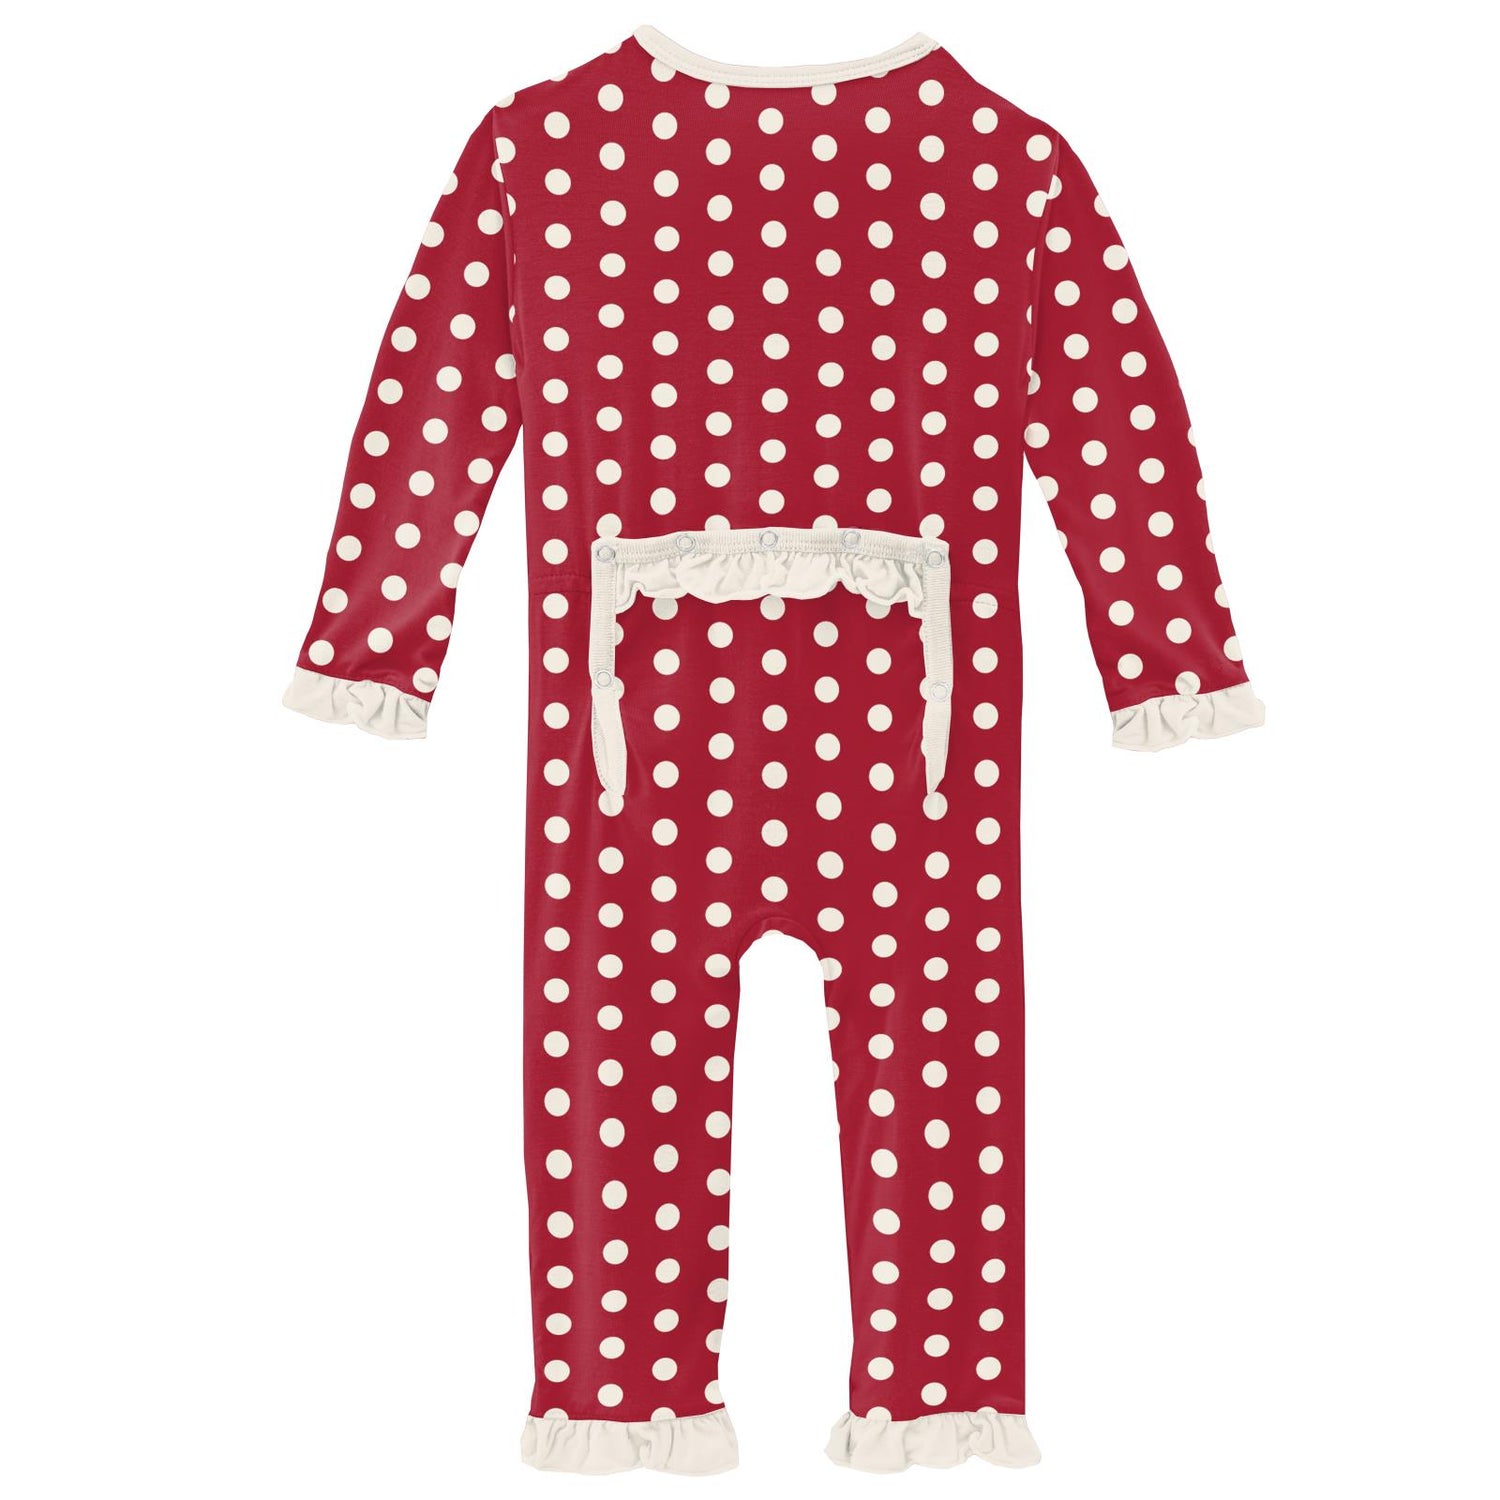 Print Classic Ruffle Coverall with Snaps in Candy Apple Polka Dots